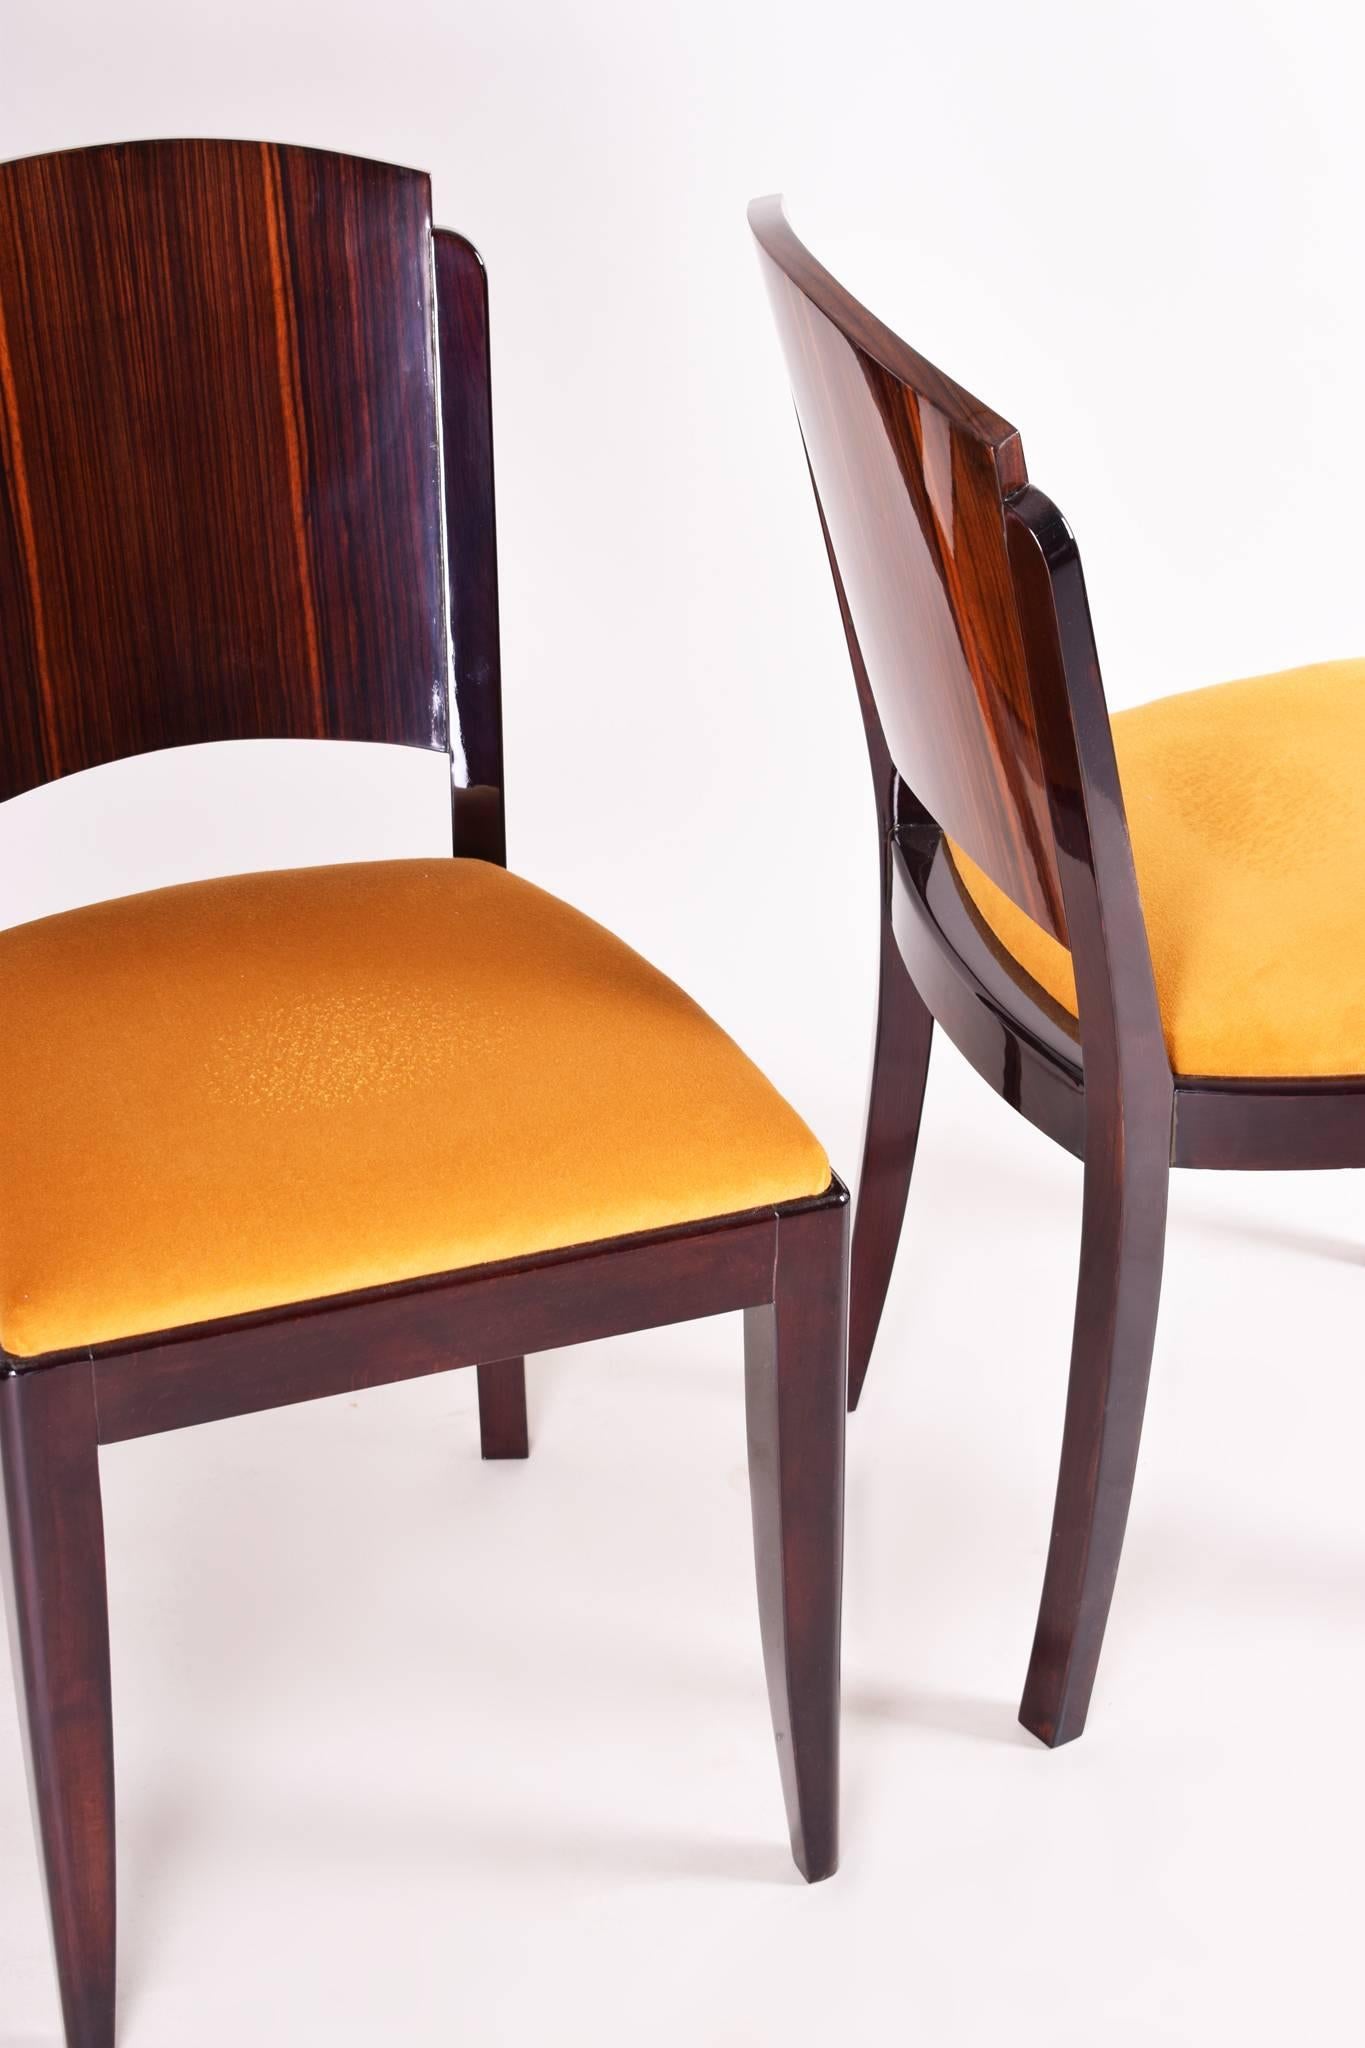 Early 20th Century French Set of Chairs, Six Pieces Designed by French Architect Jules Leleu